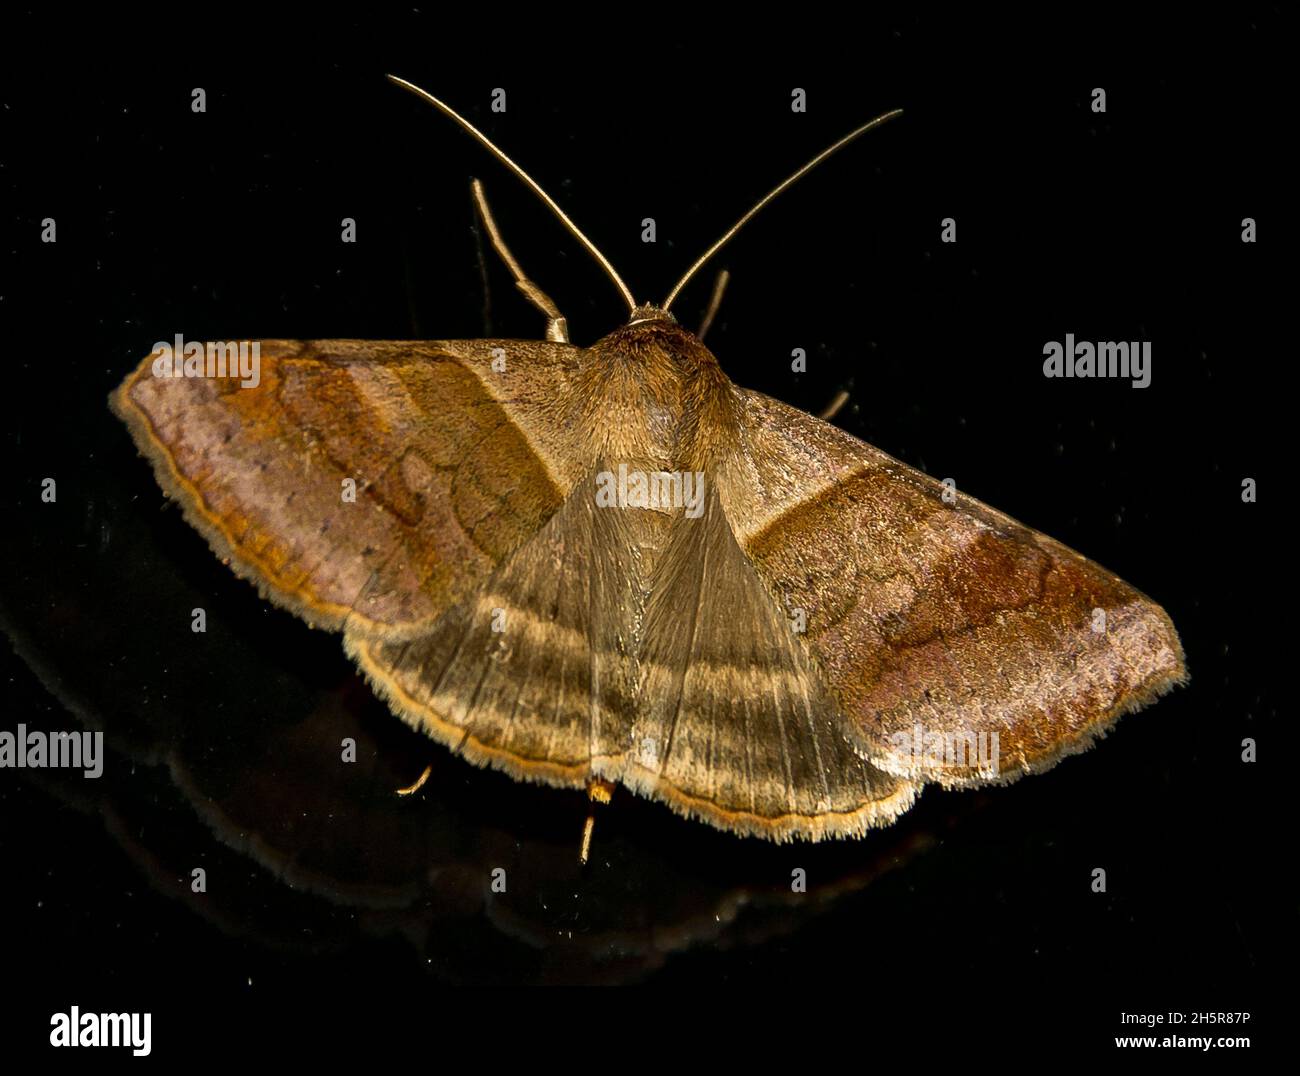 Australian triple barred moth, mocis trifasciata. A large brown striped moth resting on a dark surface at night. Late summer, Queensland, Australia. Stock Photo